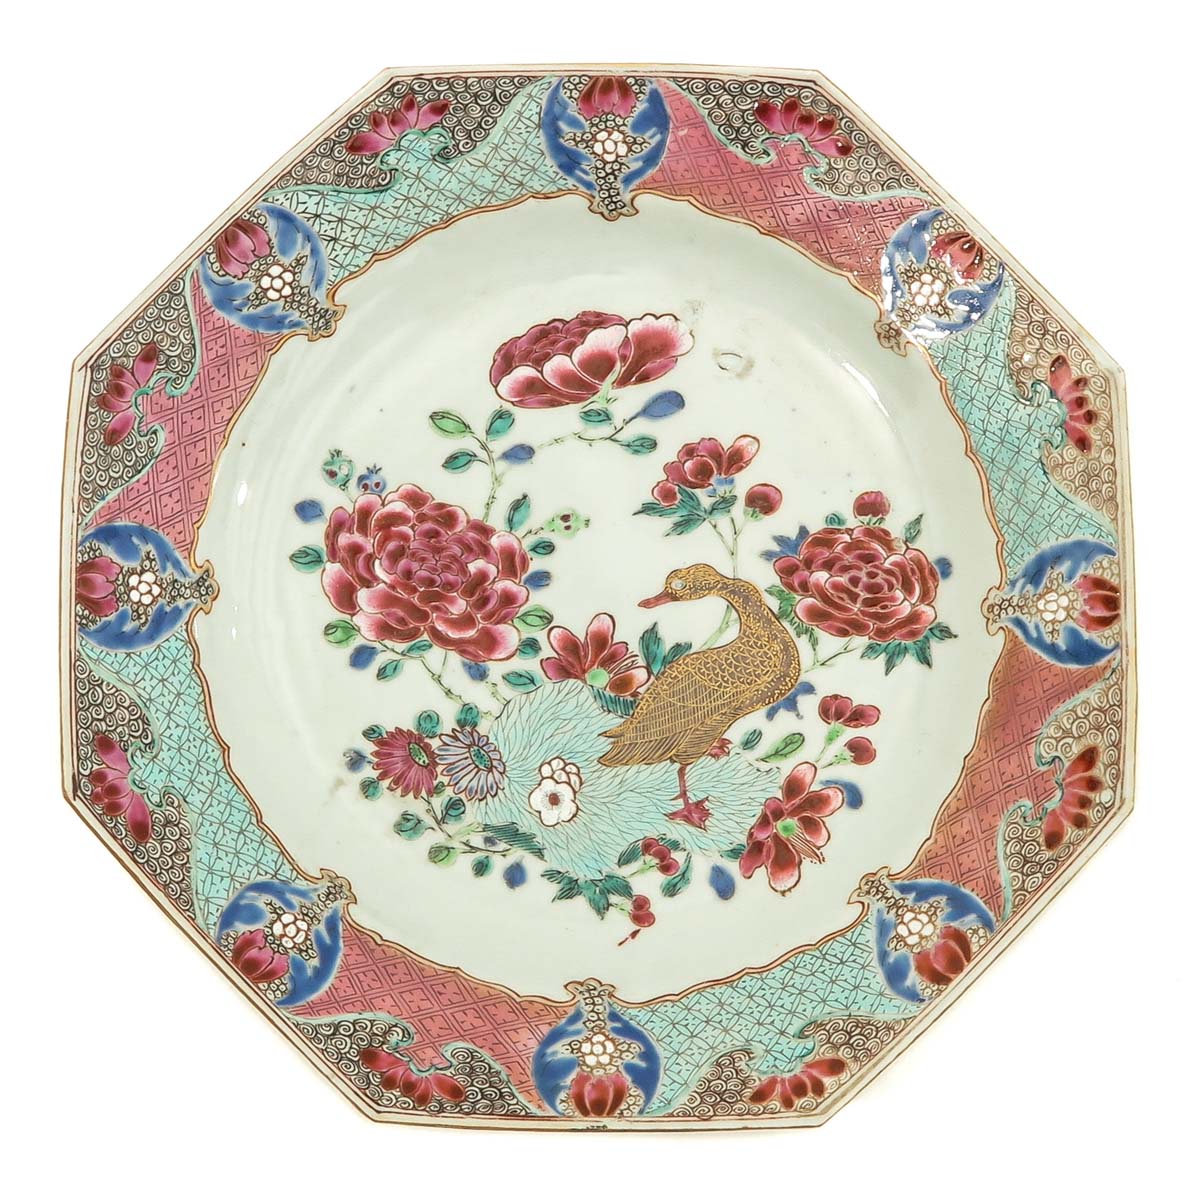 A Series of 3 Famille Rose Plates - Image 7 of 10